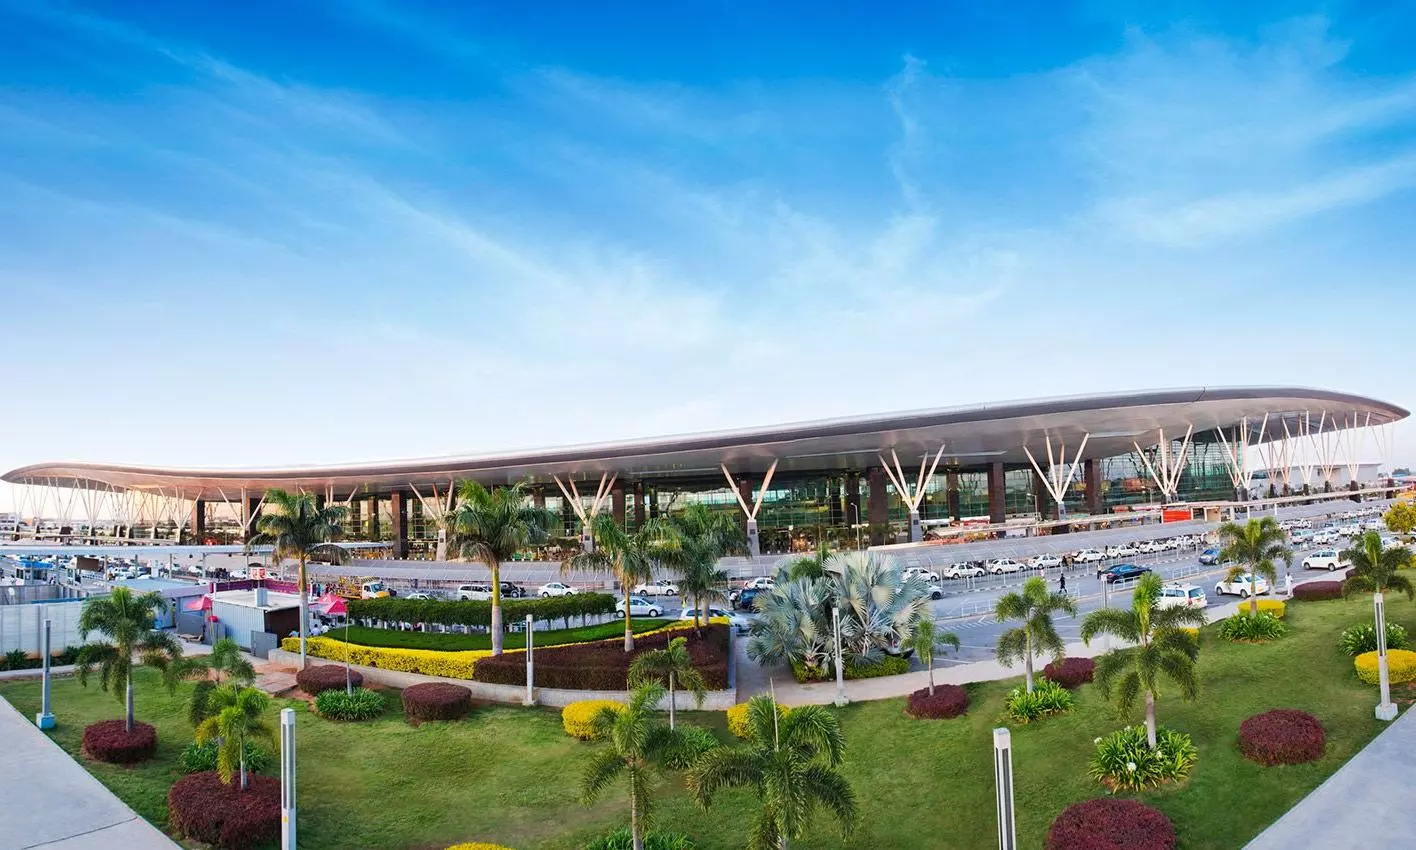 BLR Airport, Amazon Web Services to set up joint innovation center